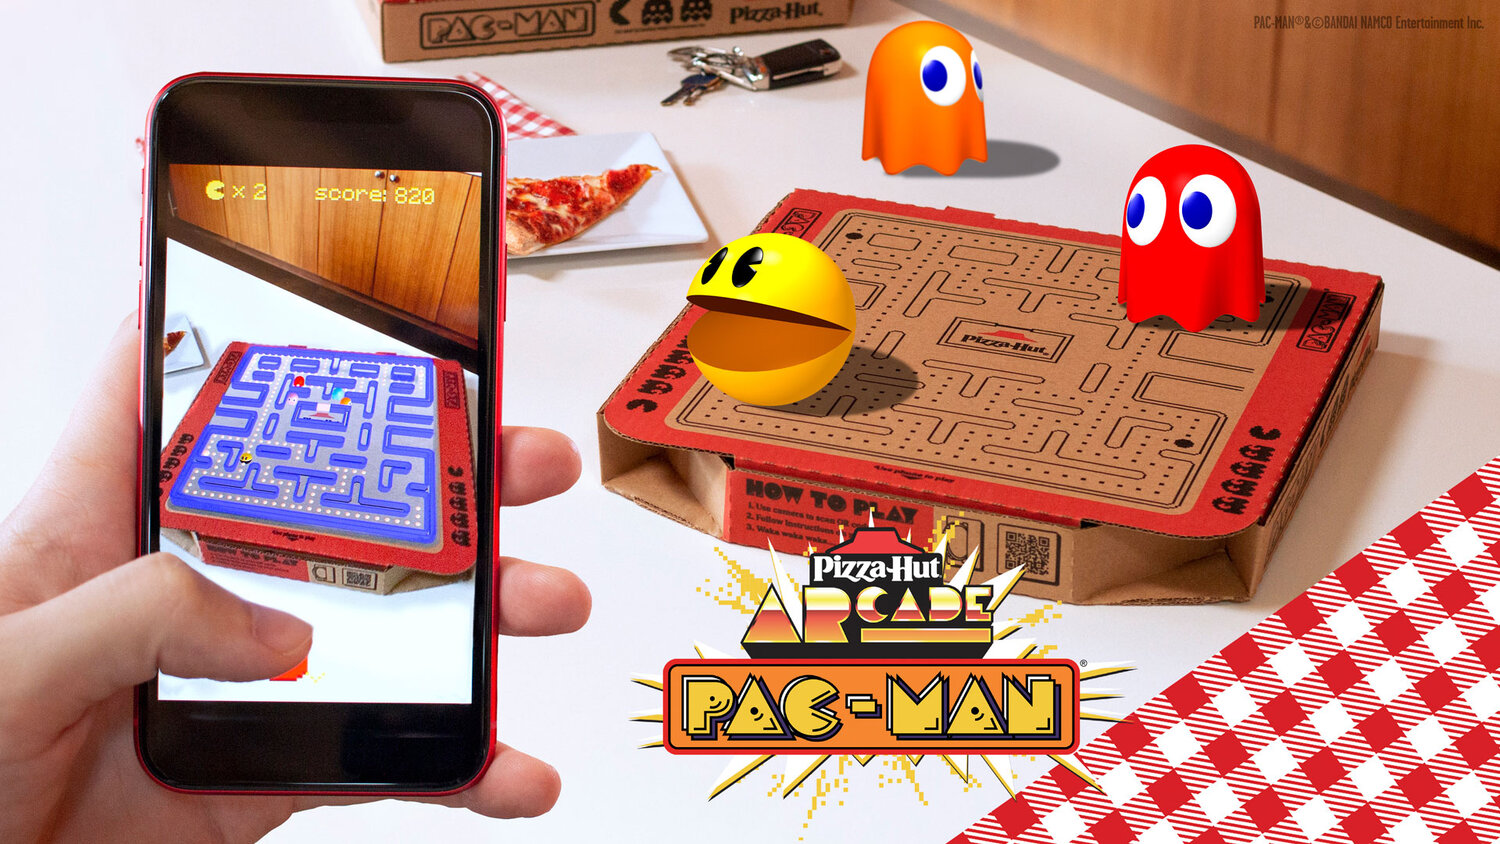 Pizza Hut Arcade campaign incorporated a Pac-Man board that could be played in AR via a mobile device.